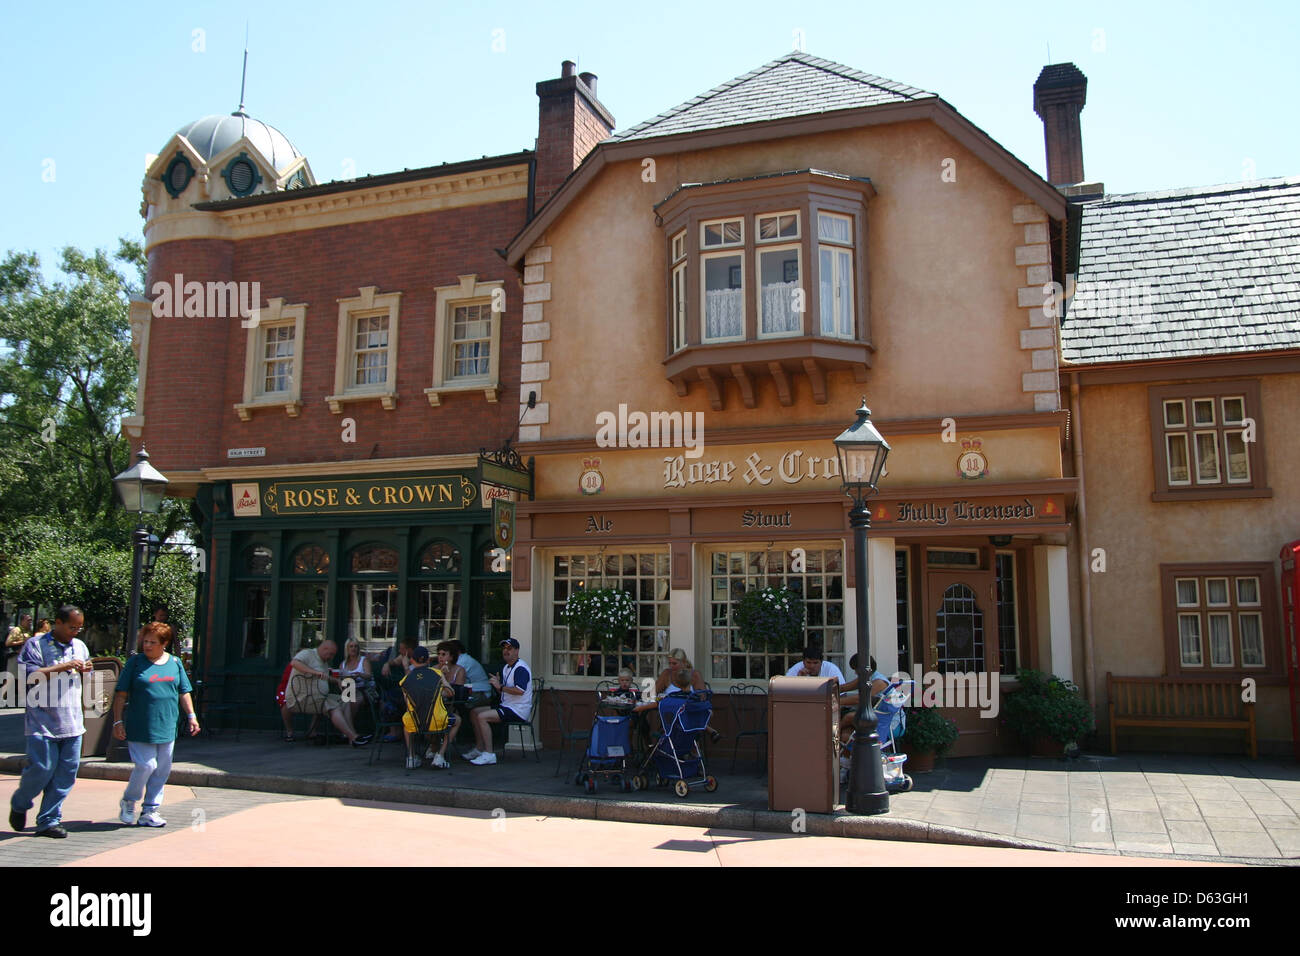 The Rose Crown Pub And Dining Room Serves Traditional British Food As Well As Beer And Ale In Epcot Disney World Florida Stock Photo Alamy